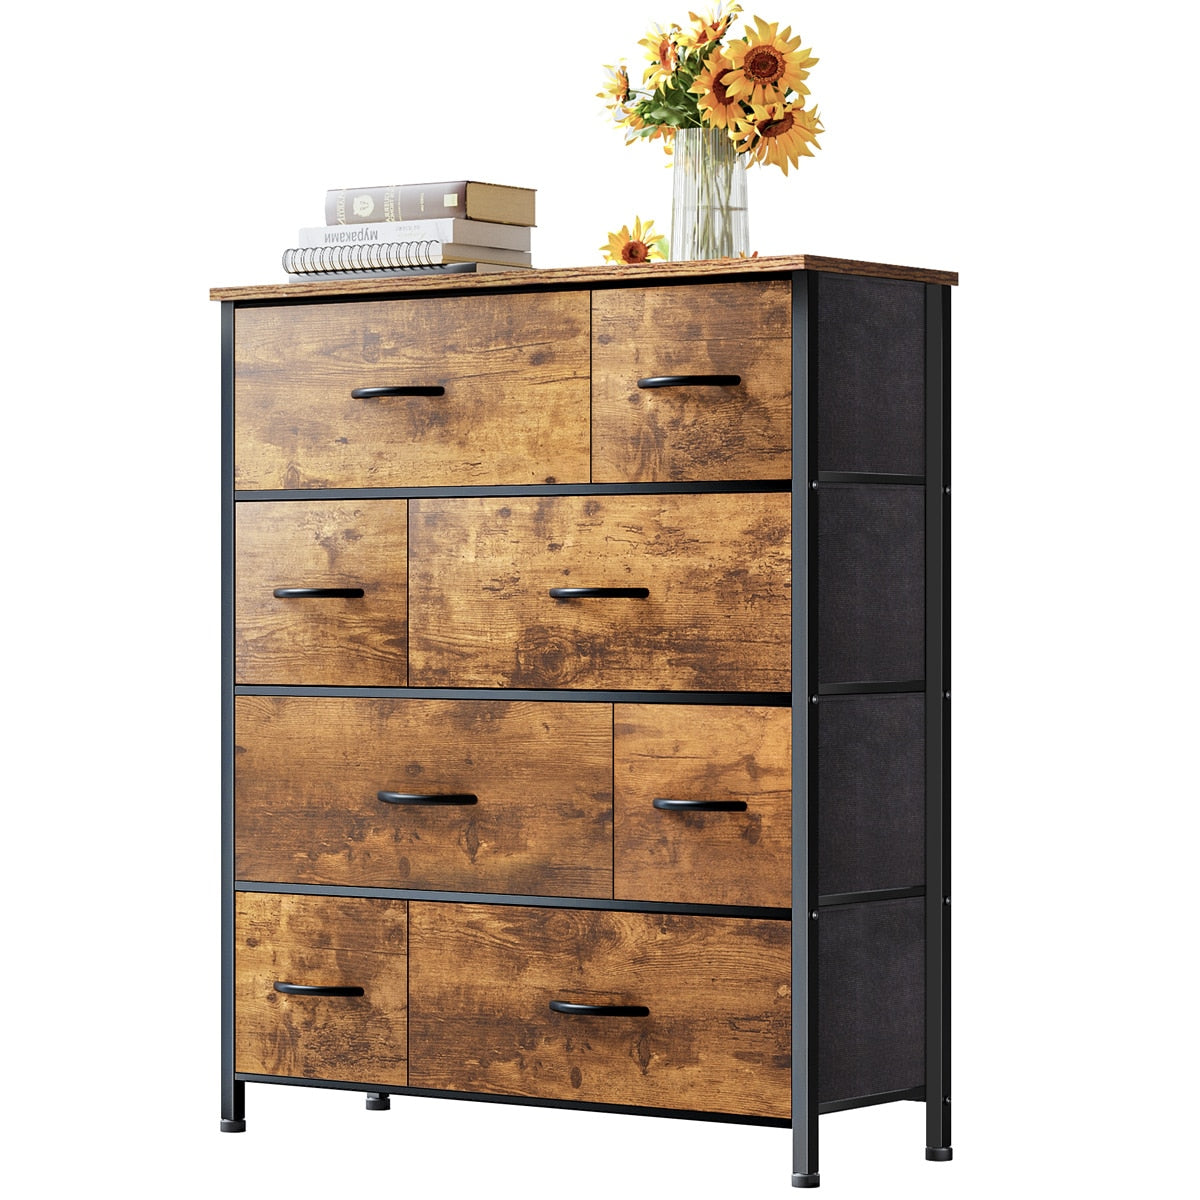 EnHomee 8 Drawer Dresser for Bedroom Fabric Dressers & Chest of Drawers with Wood Top Tall Dresser Near the Bed Storage Cabinet